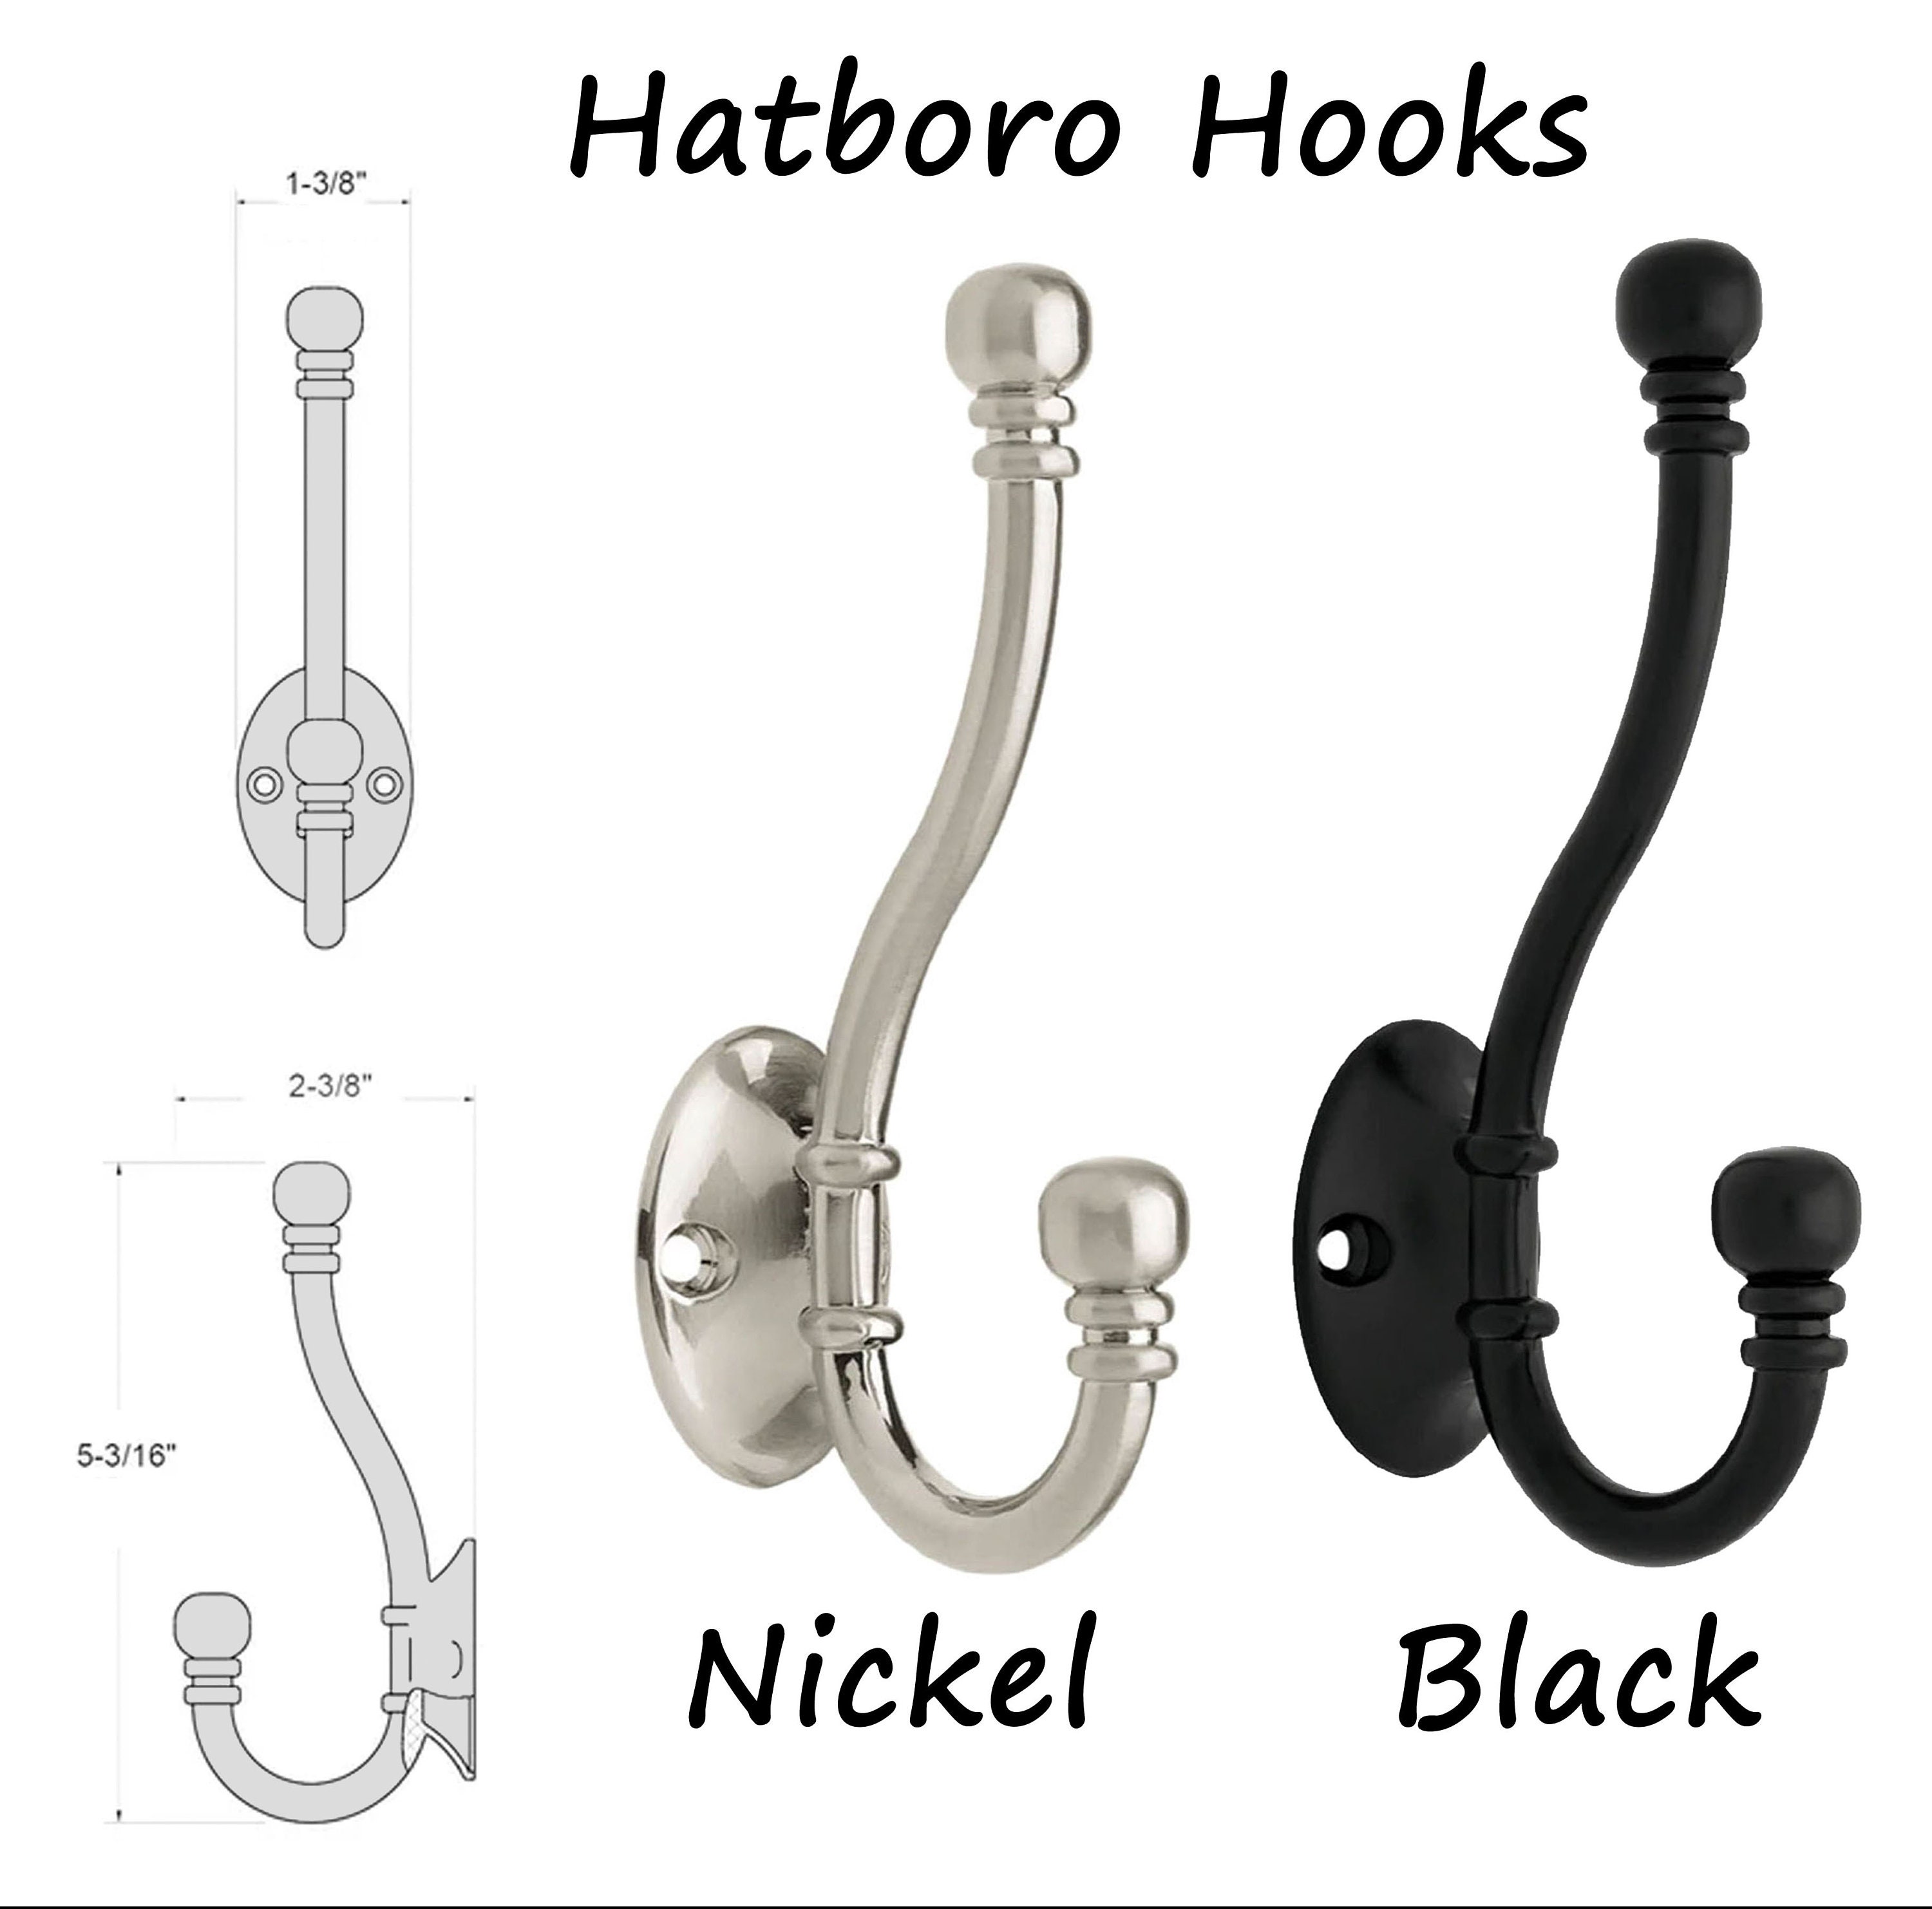 Contemporary Black Finish Hatboro Hook With Ball End Design, Coat